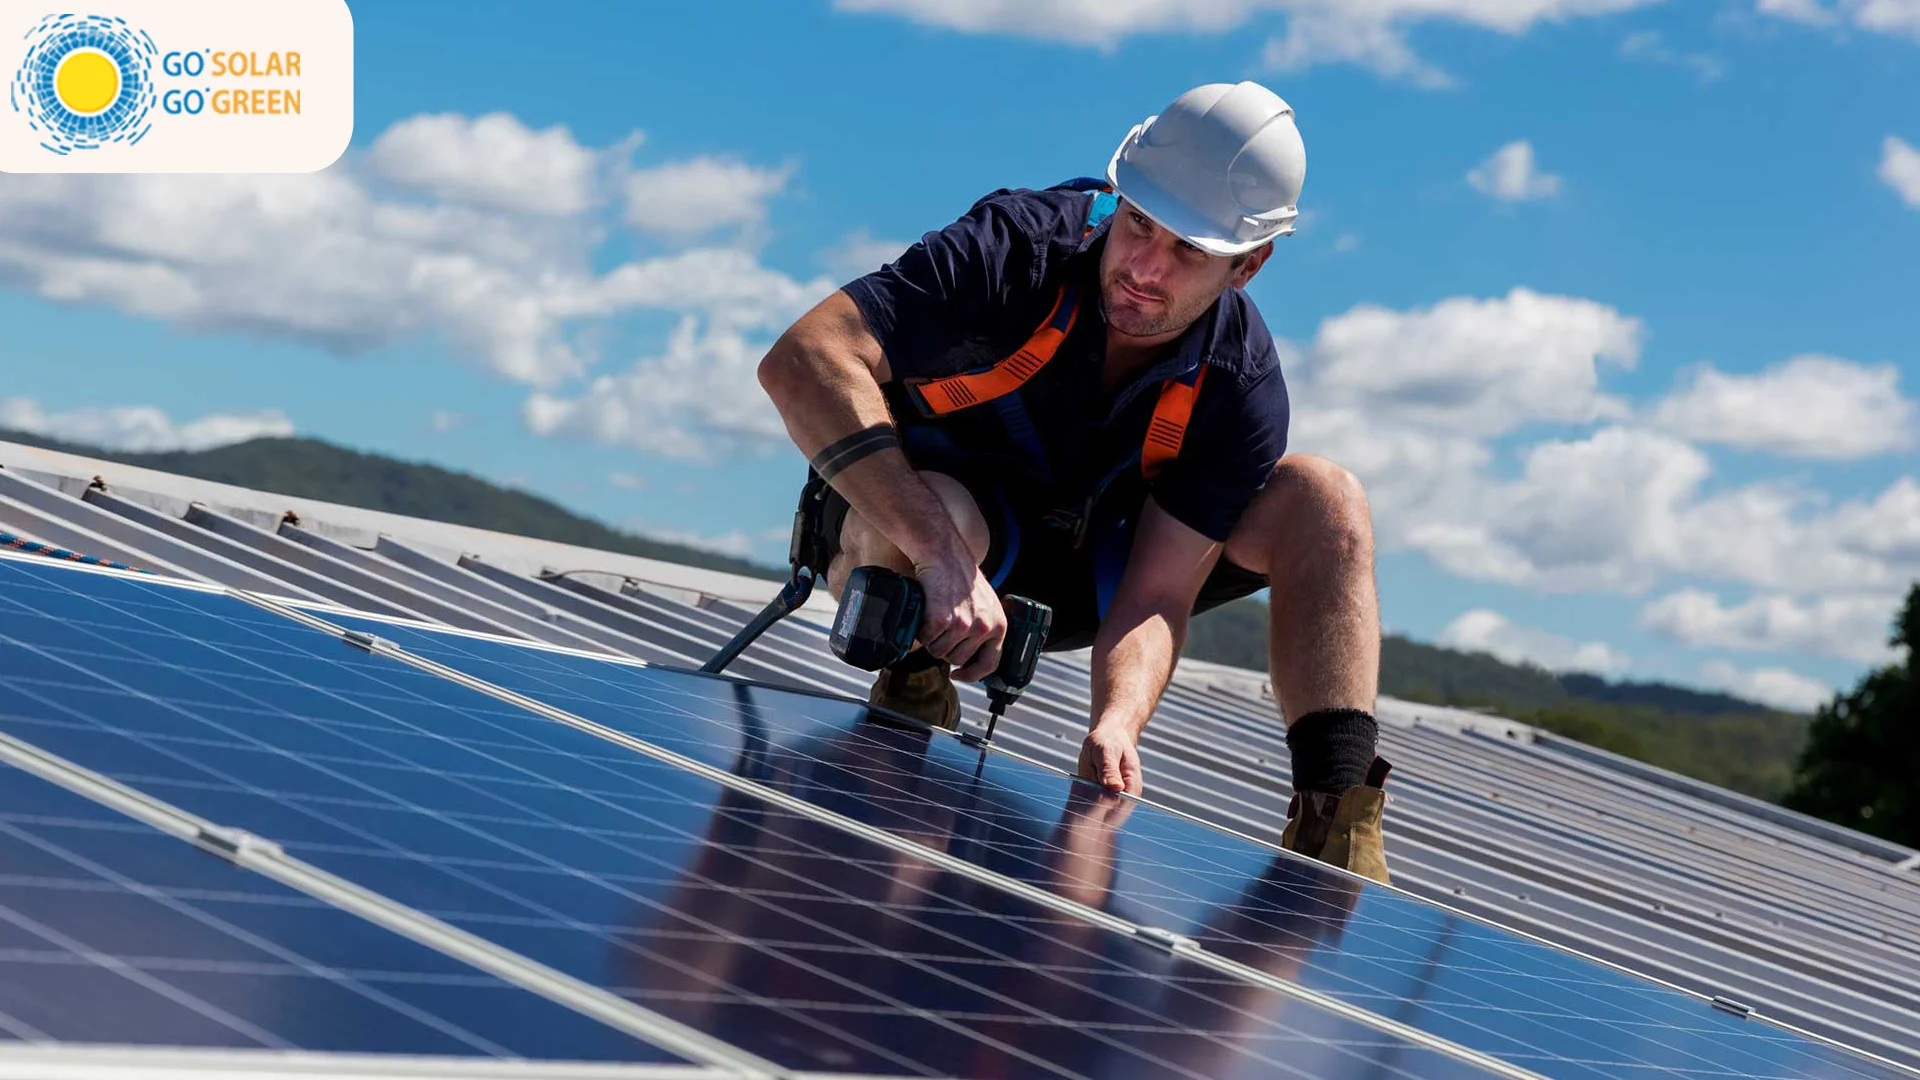 Geelong Solar Installers: Choosing the Right Company